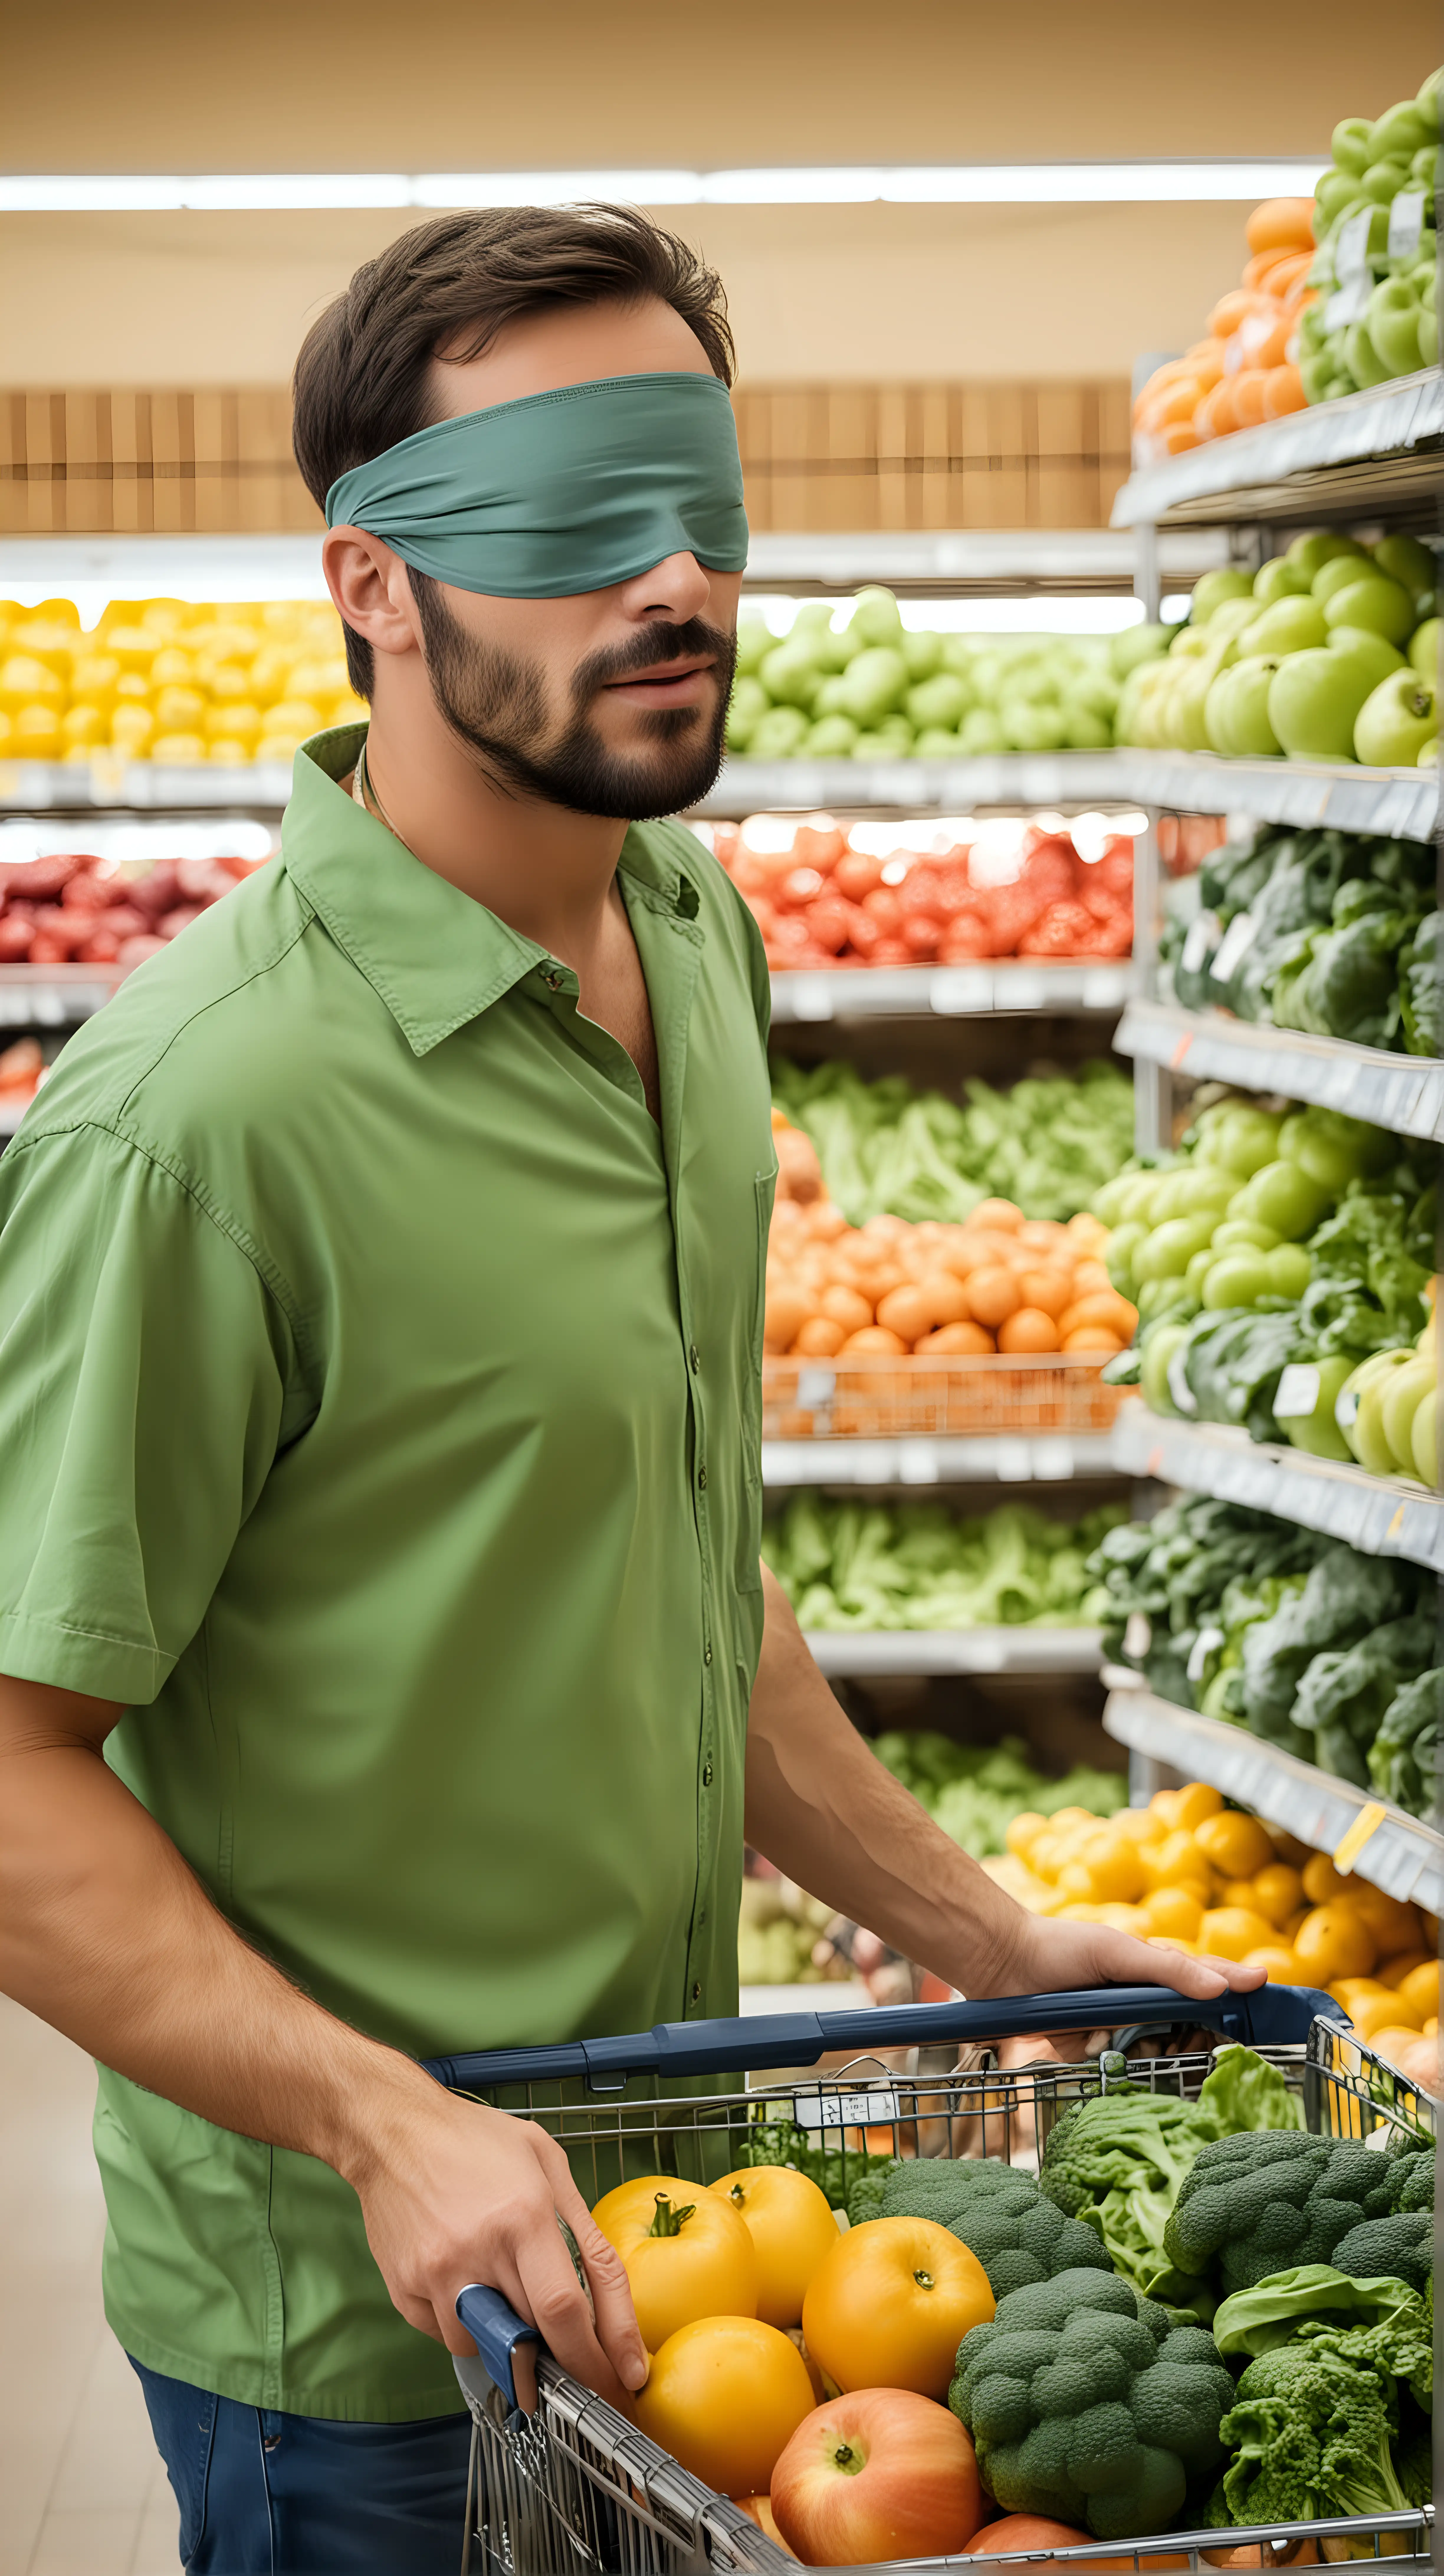 man wearing a green shirt shopping in produce section of grocery store with blindfold on